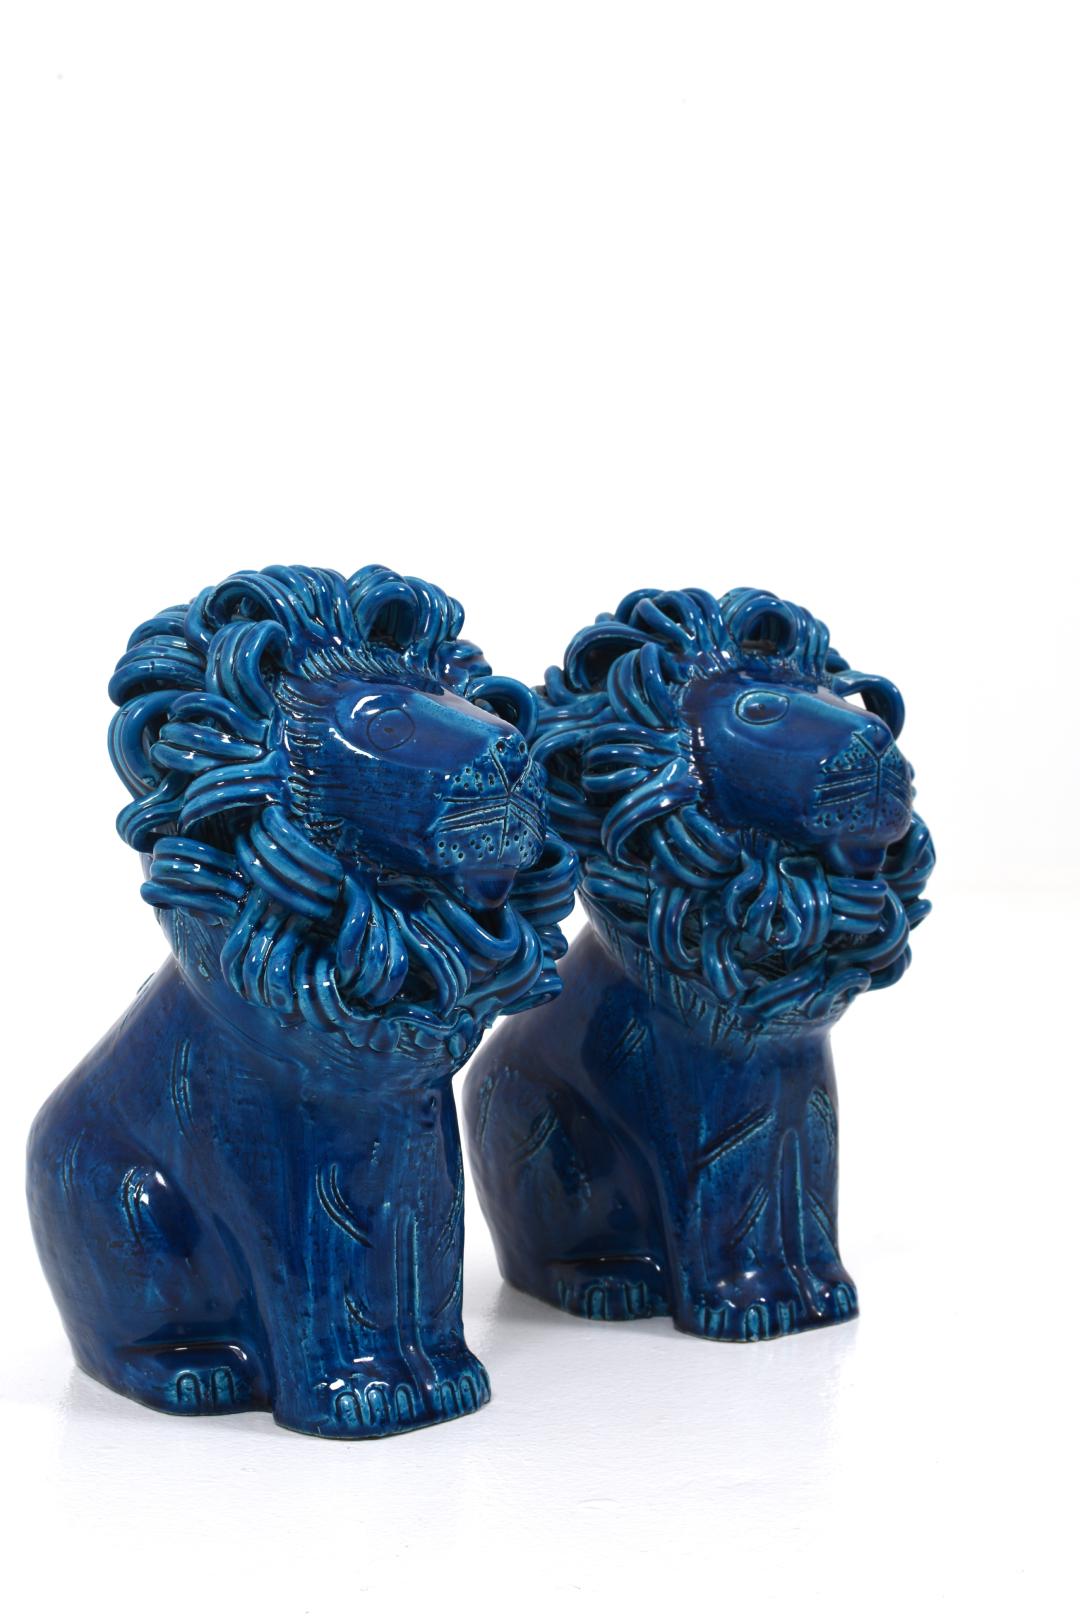 Two lions by the Italian designer Aldo Londi for Bitossi from the 1960s.
The lion has a beautiful rimini blue color and very beautiful details. Sold as a pair.